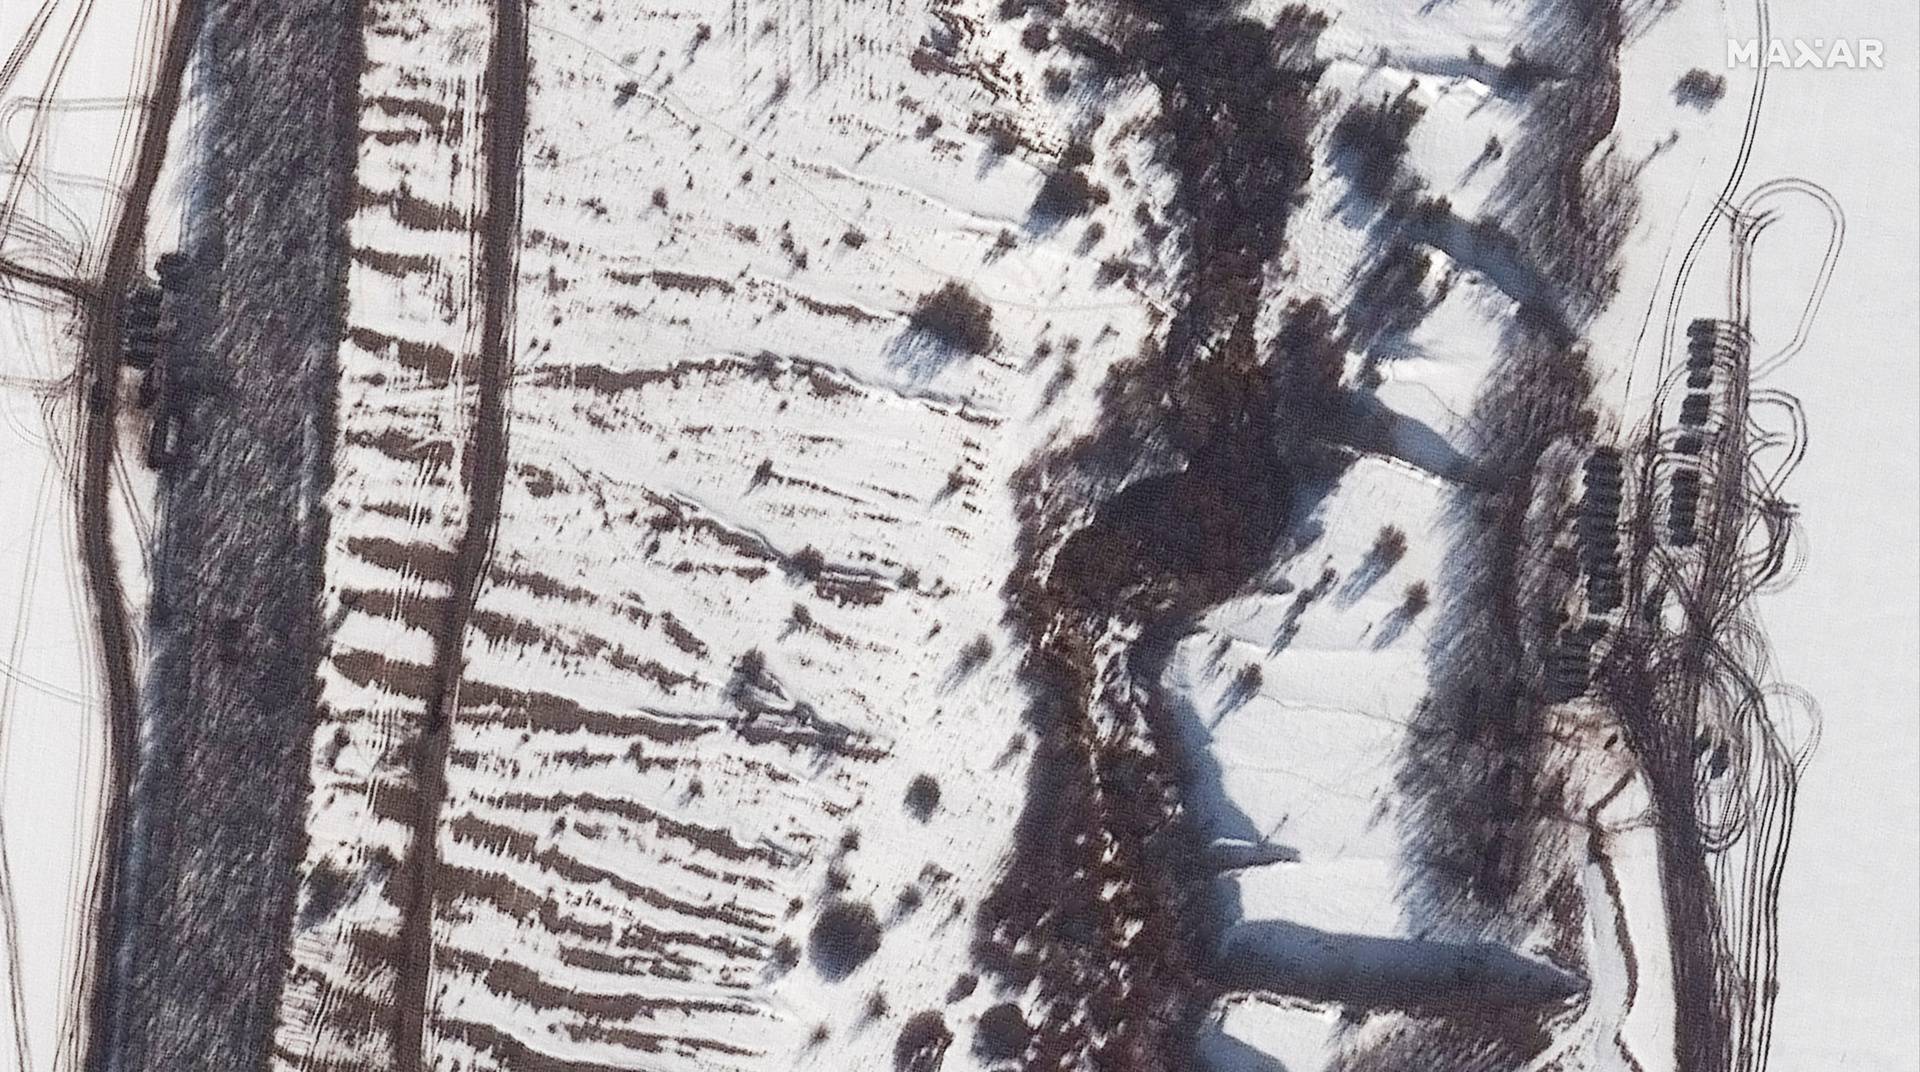 A satellite image shows additional armor and equipment deployed along a tree line, near Valuyki